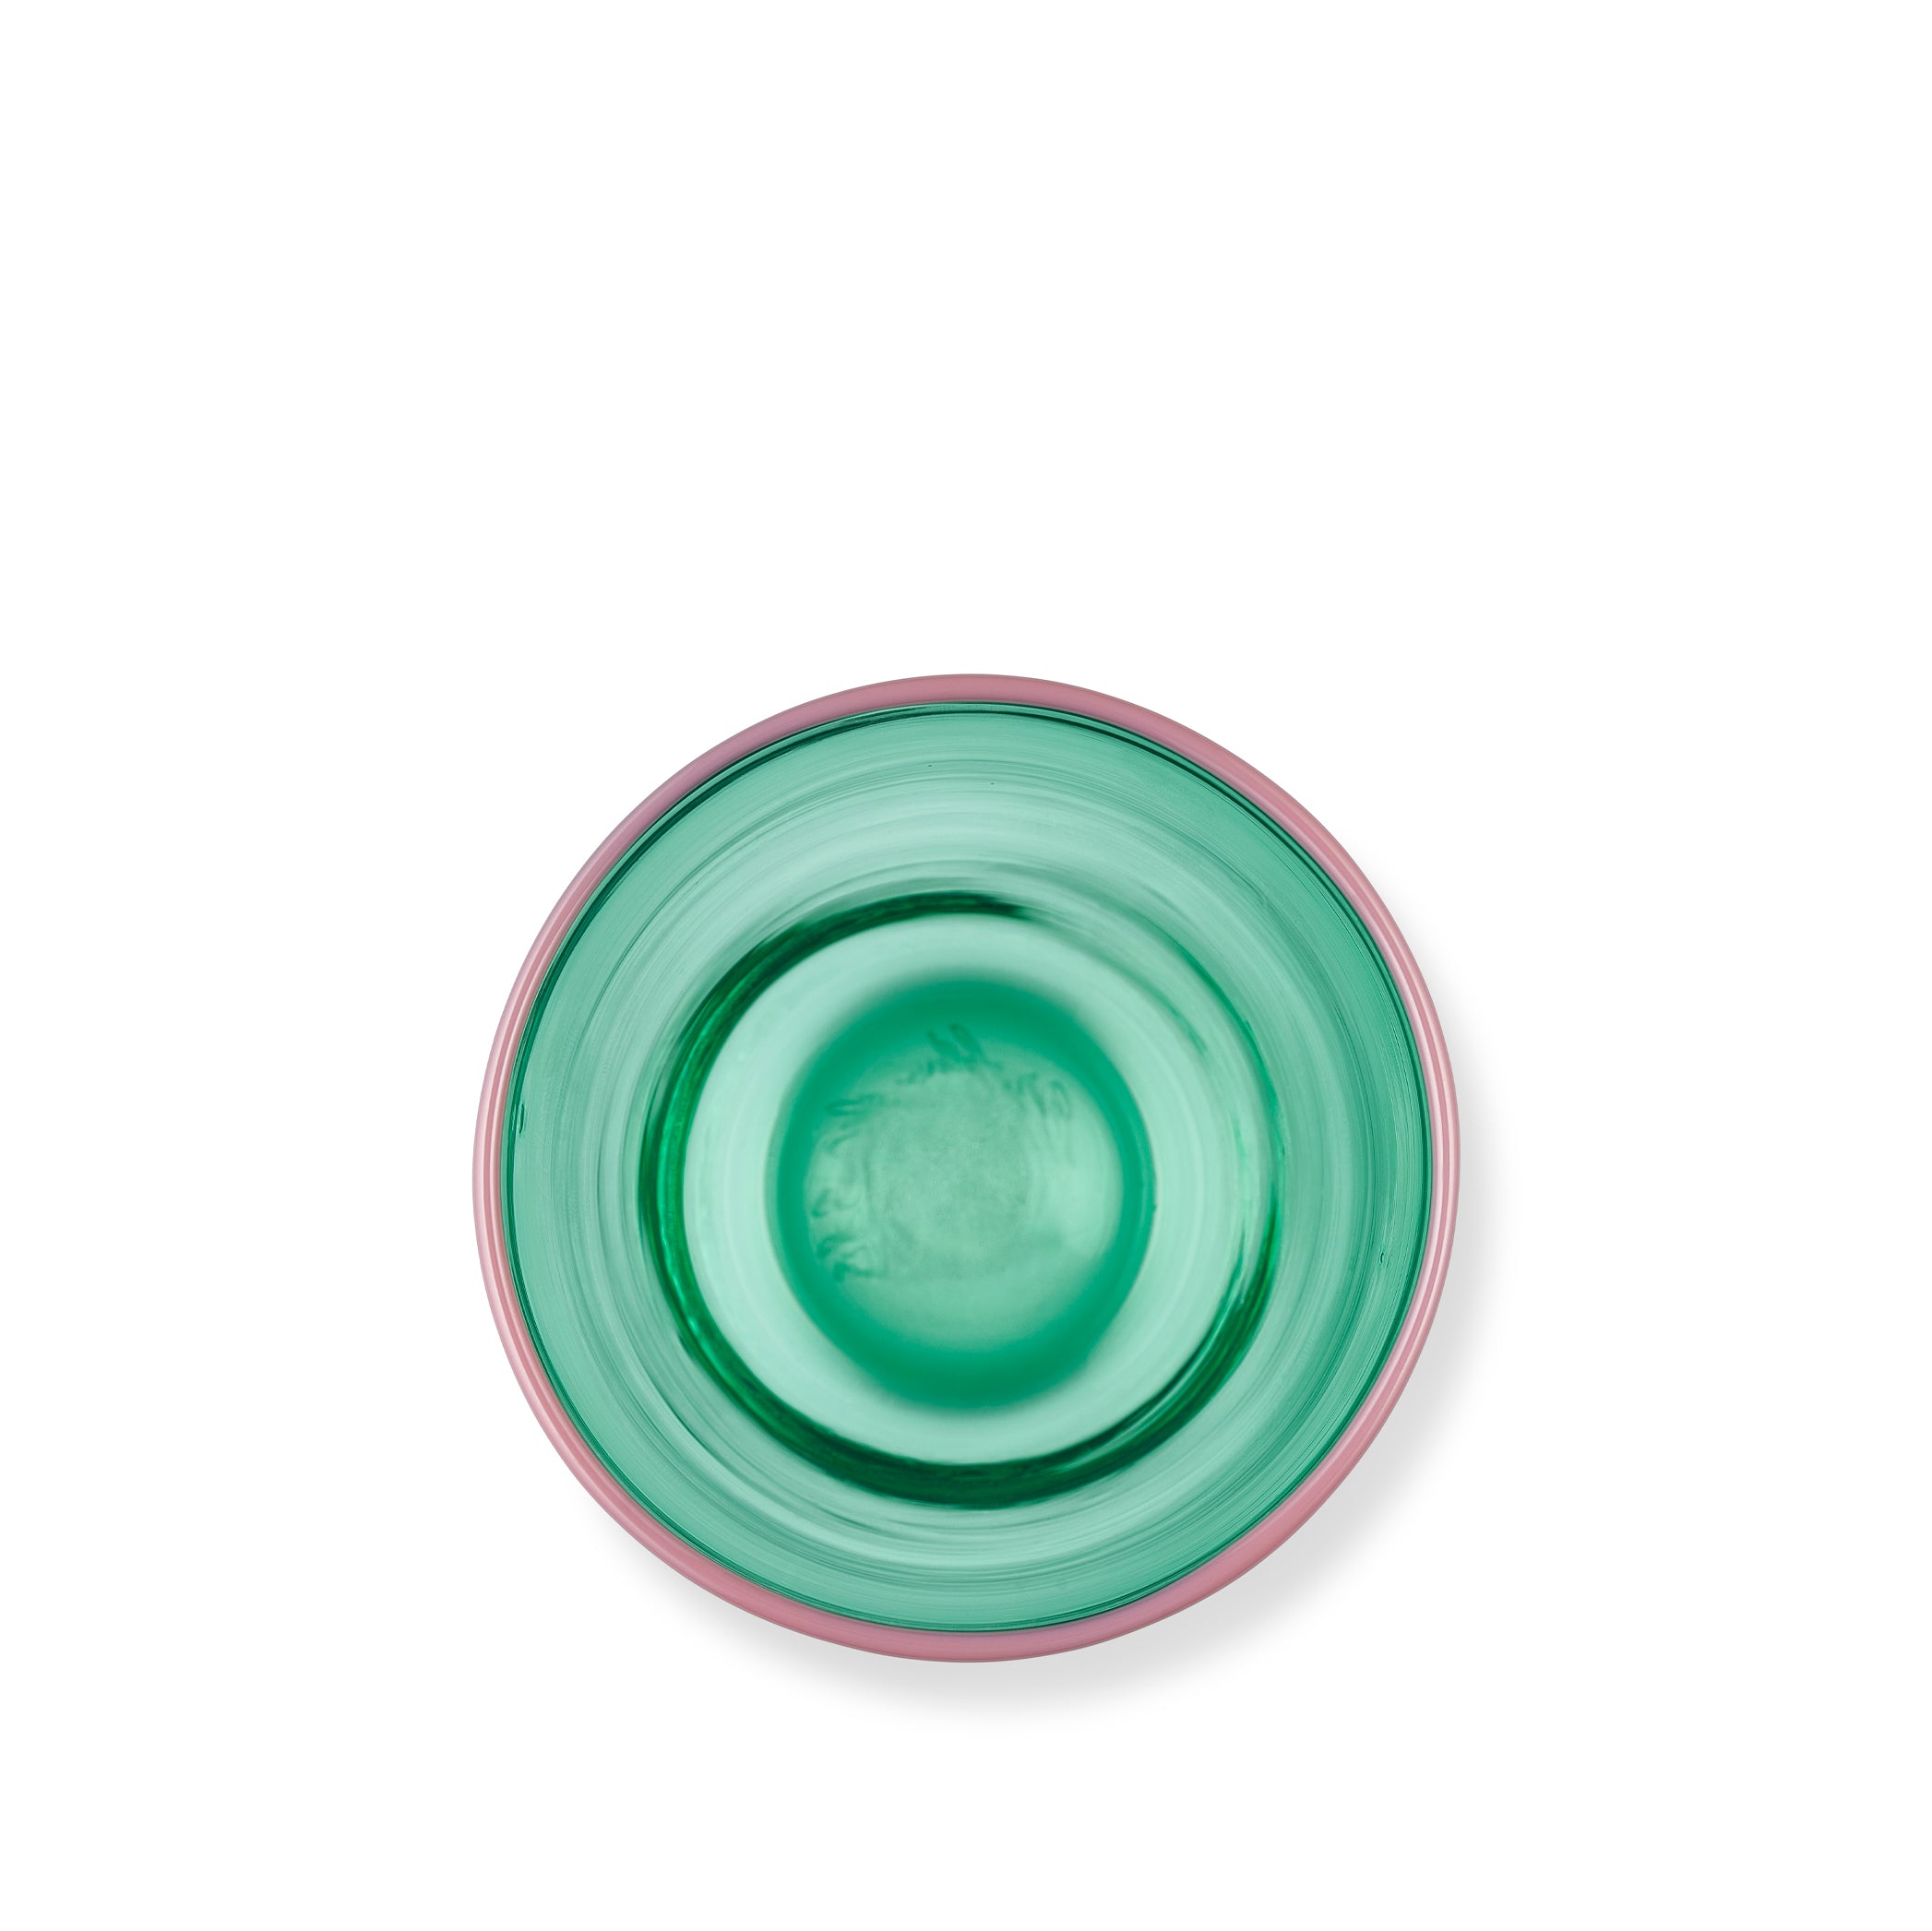 Handblown Bumba Glass in Emerald Green with Pink Rim, 30cl